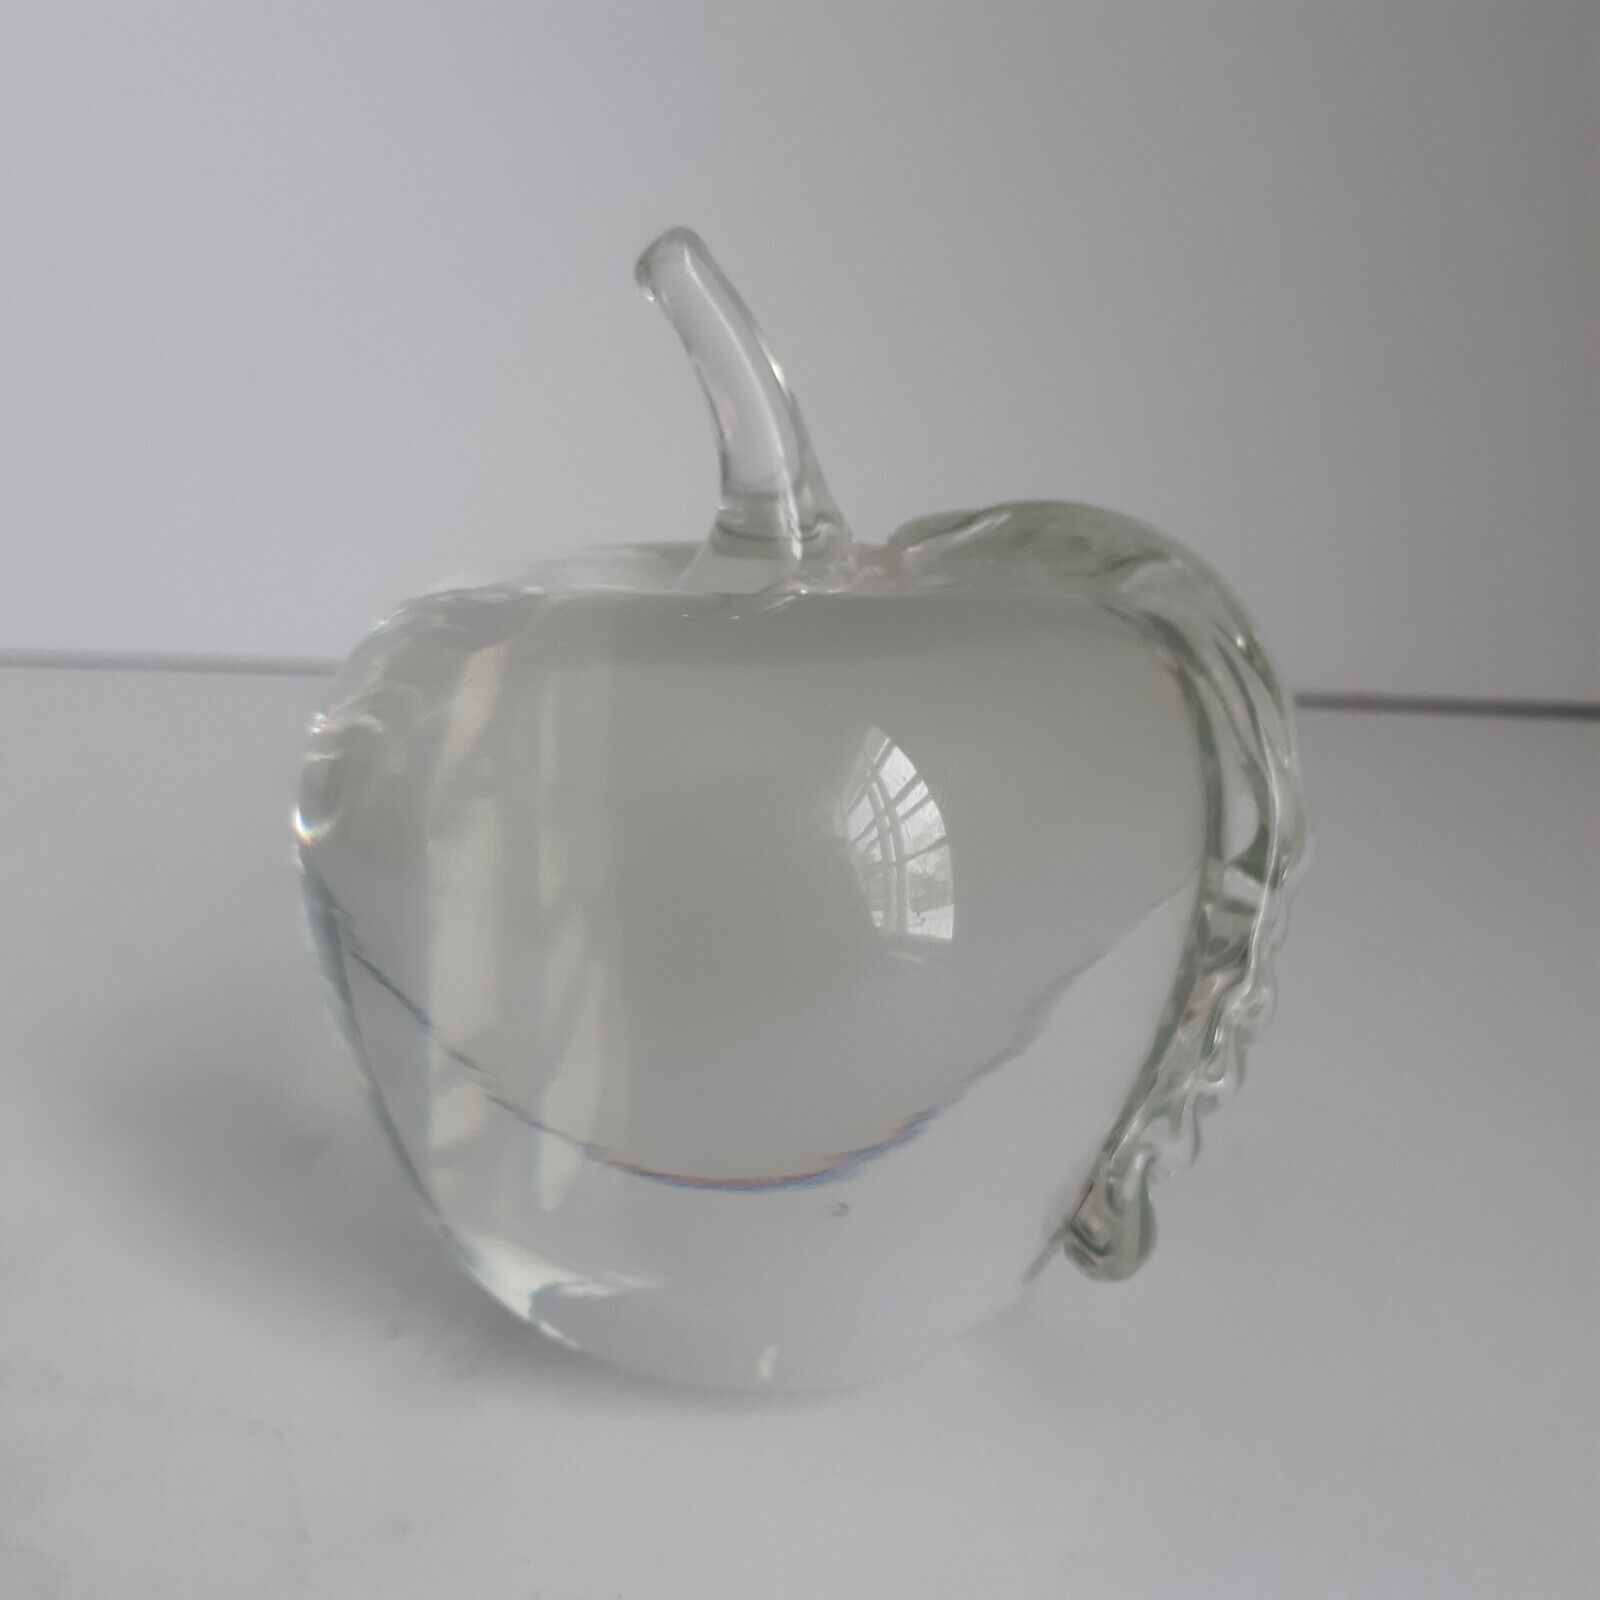  VINTAGE CLEAR GLASS APPLE PAPERWEIGHT SIGNED TANG \'85 ART GLASS 4\